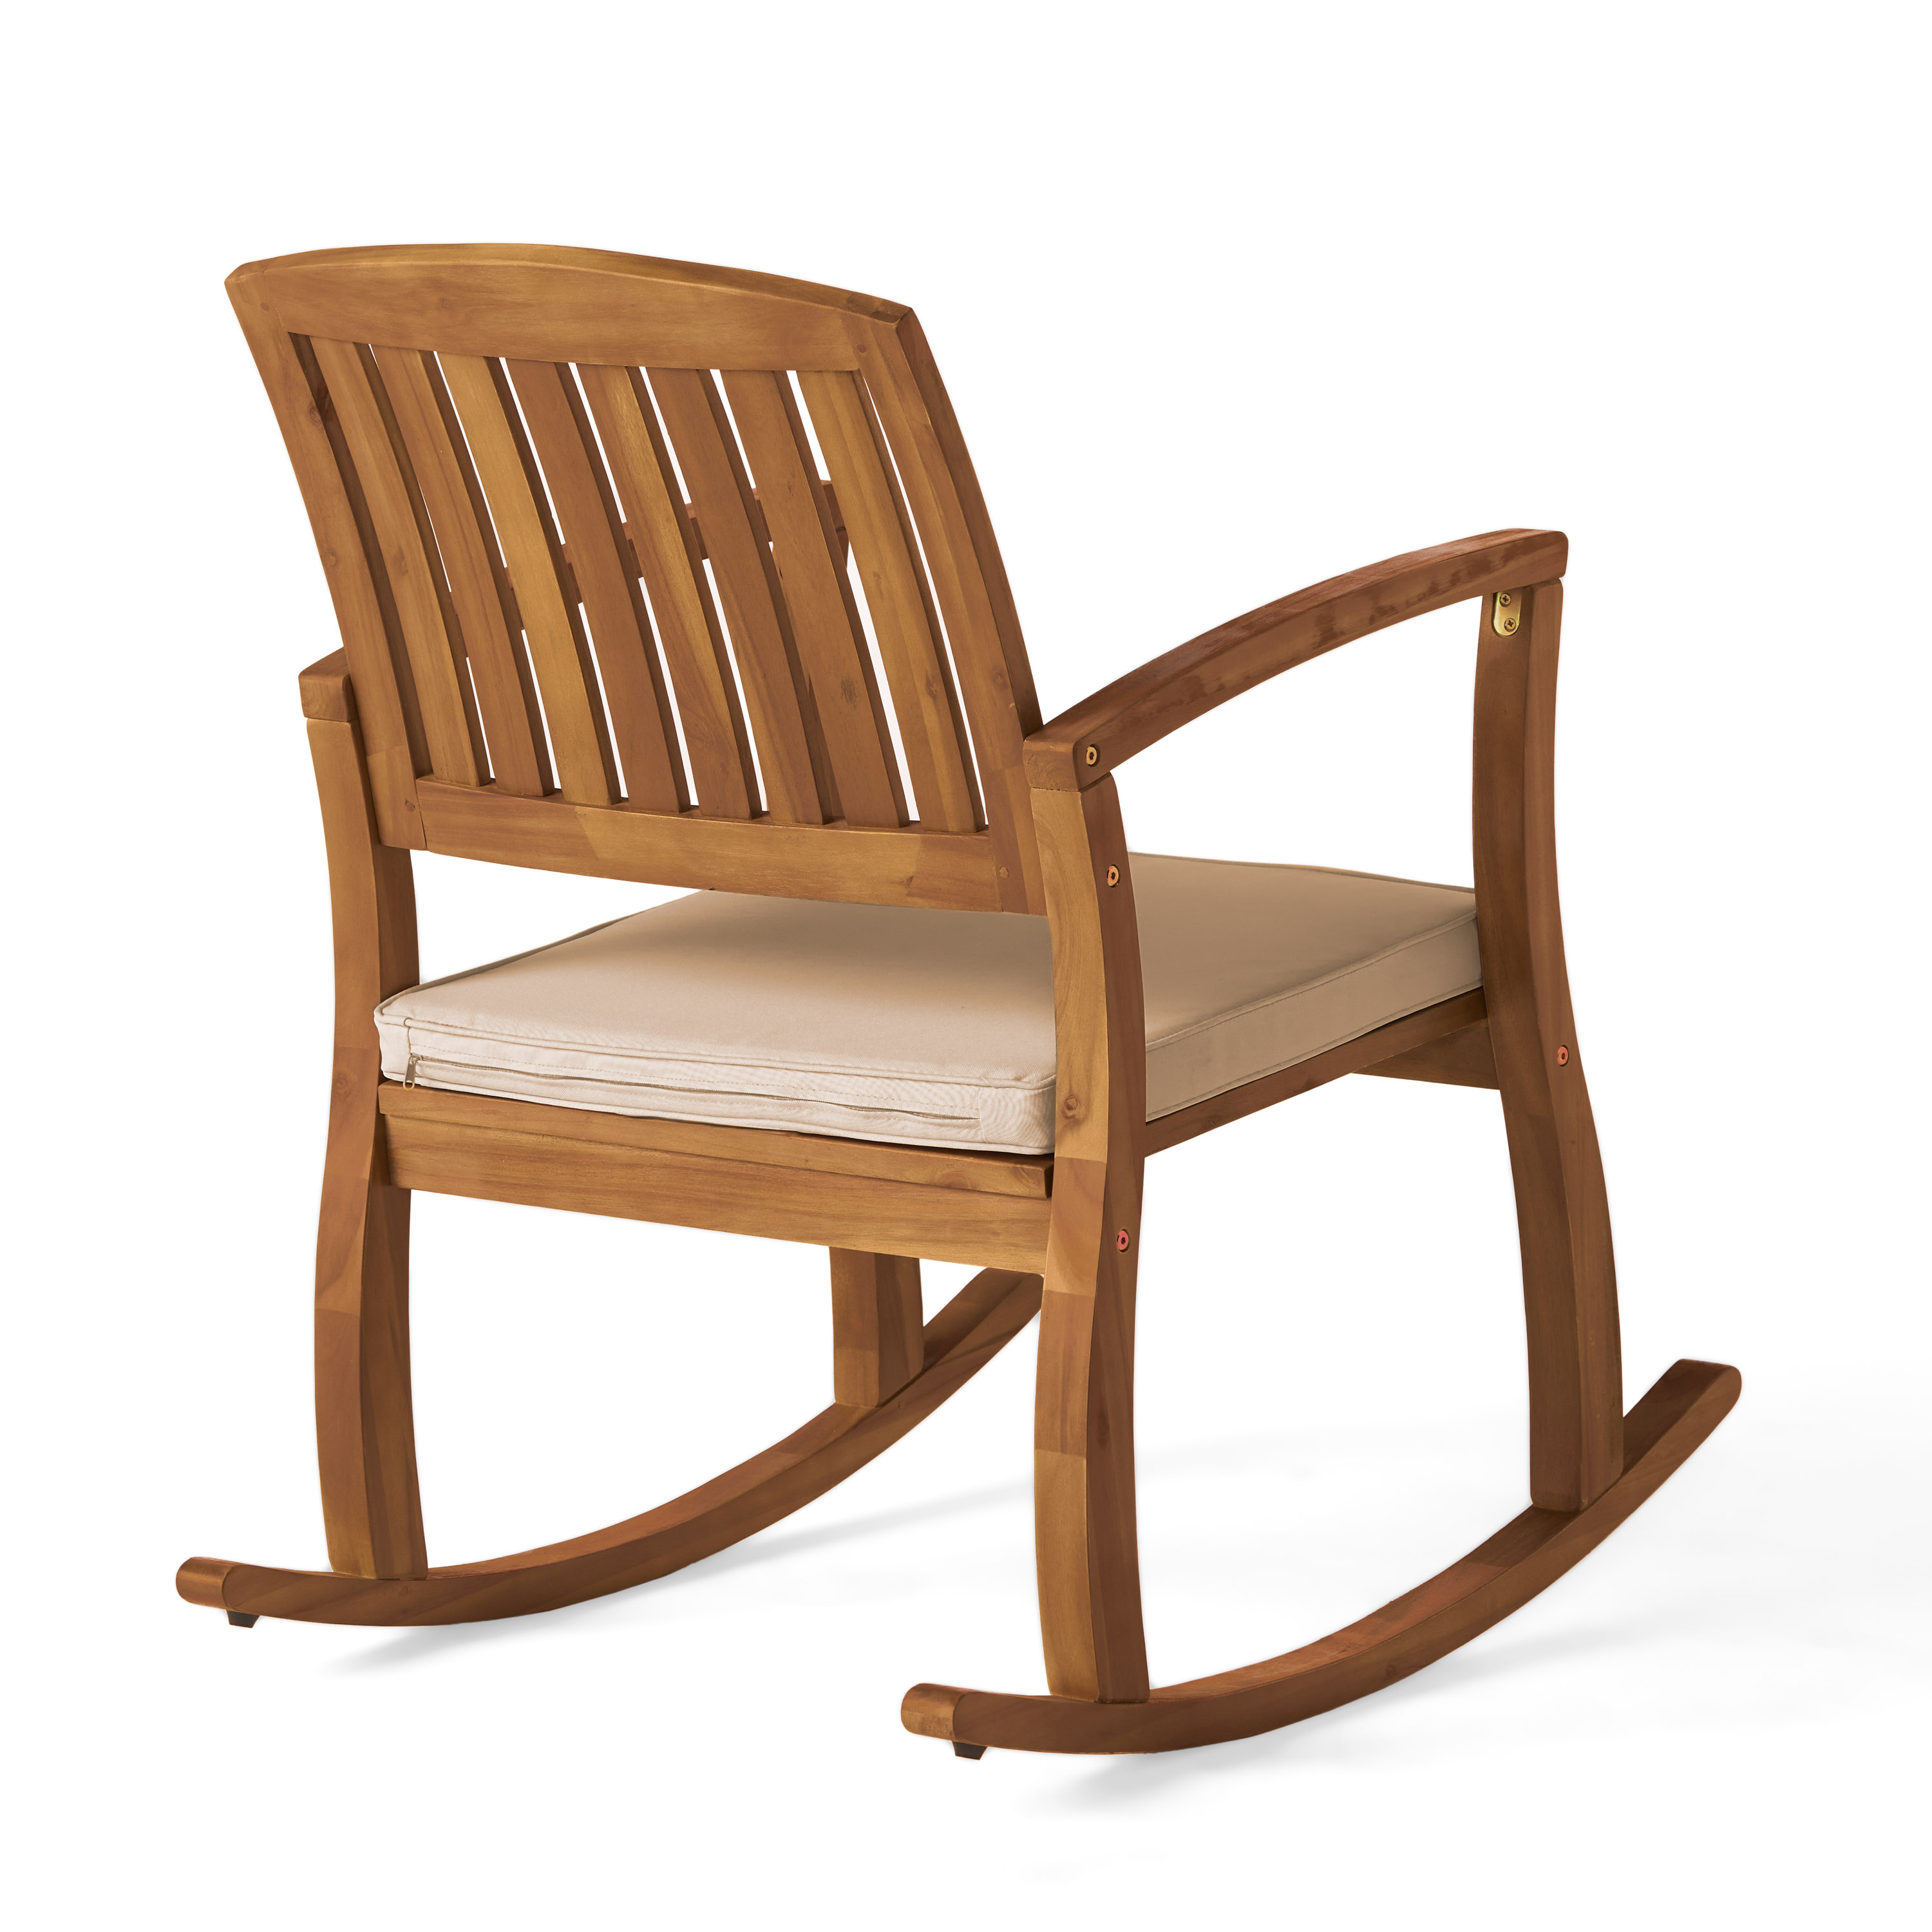 Hampton Acacia Rocking Chair with Cushion, Set of 2, and Acacia Accent Table, Teak Finish - image 5 of 12